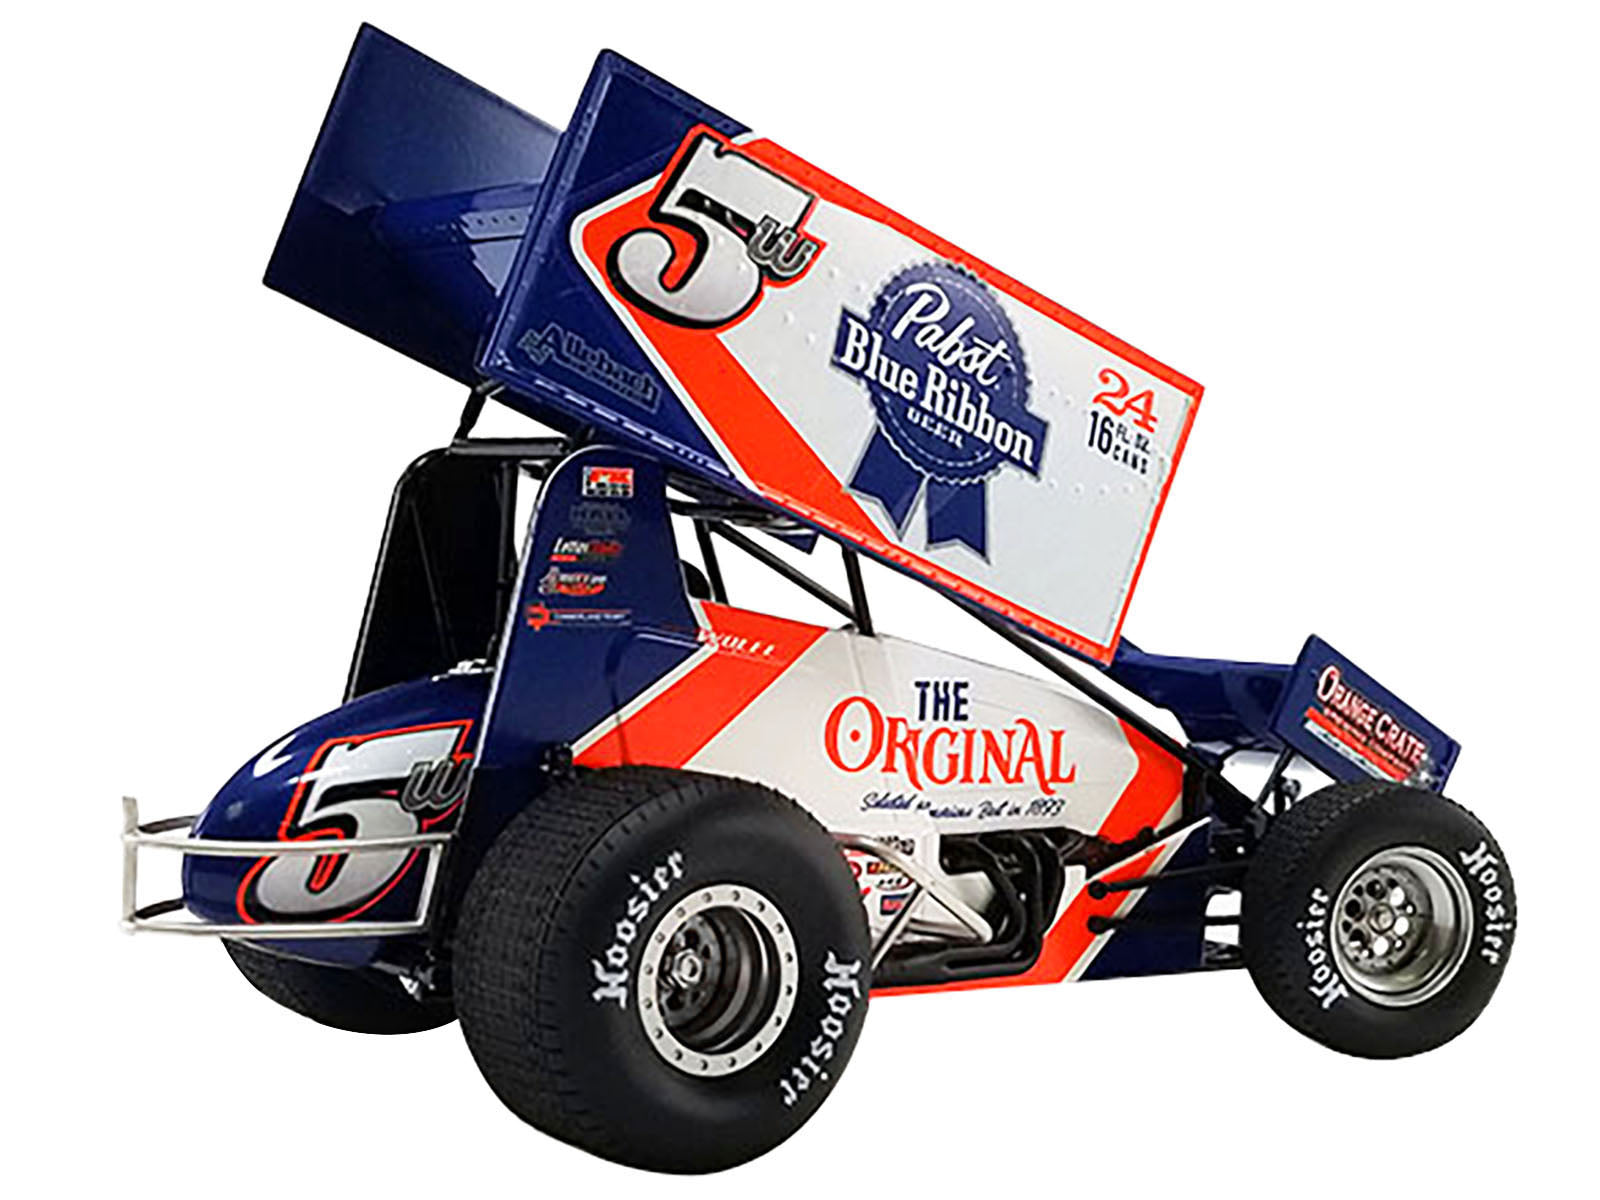 Winged Sprint Car #5W Lucas Wolfe "Pabst Blue Ribbon" Allebach Racing "World of Outlaws" (2022) 1/18 Diecast Model Car by ACME